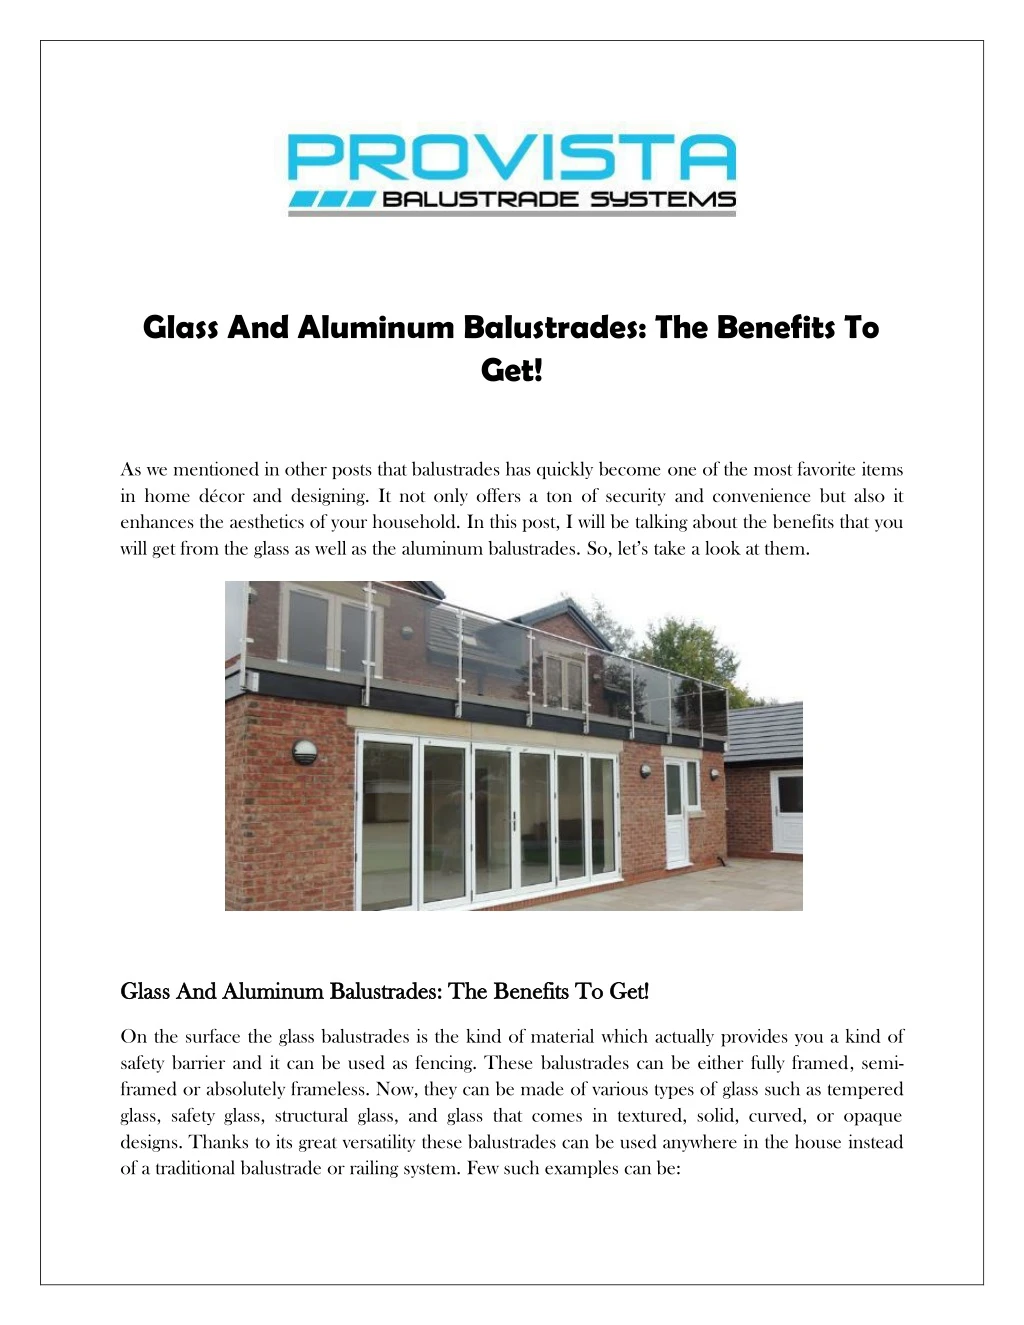 glass and aluminum balustrades the benefits to get